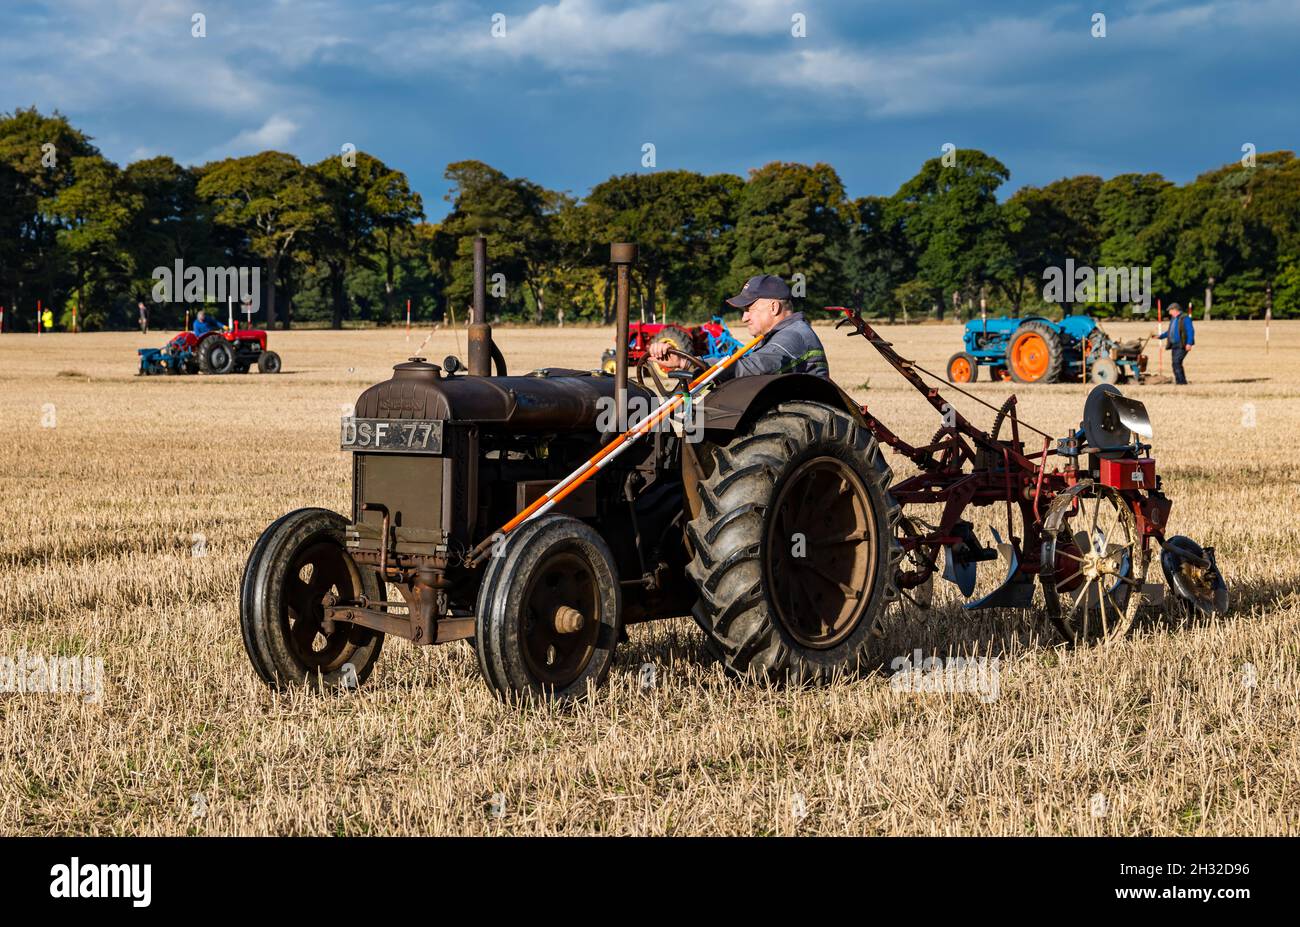 Man driving a vintage Fordson tractor in ploughing match in stubble field, East Lothian, Scotland, UK Stock Photo